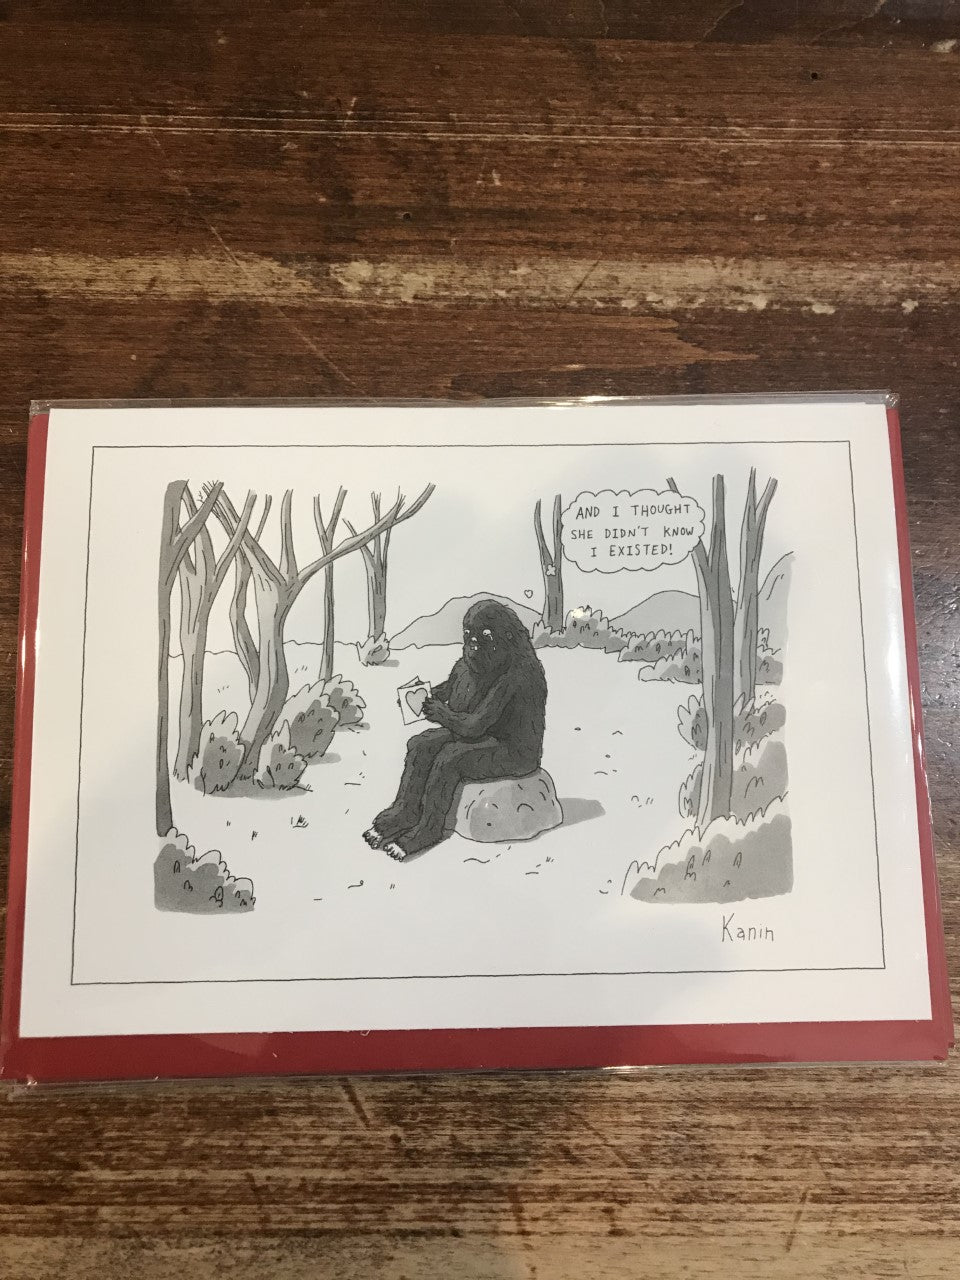 The New Yorker Valentine's Day Card-Didn't Know I Existed